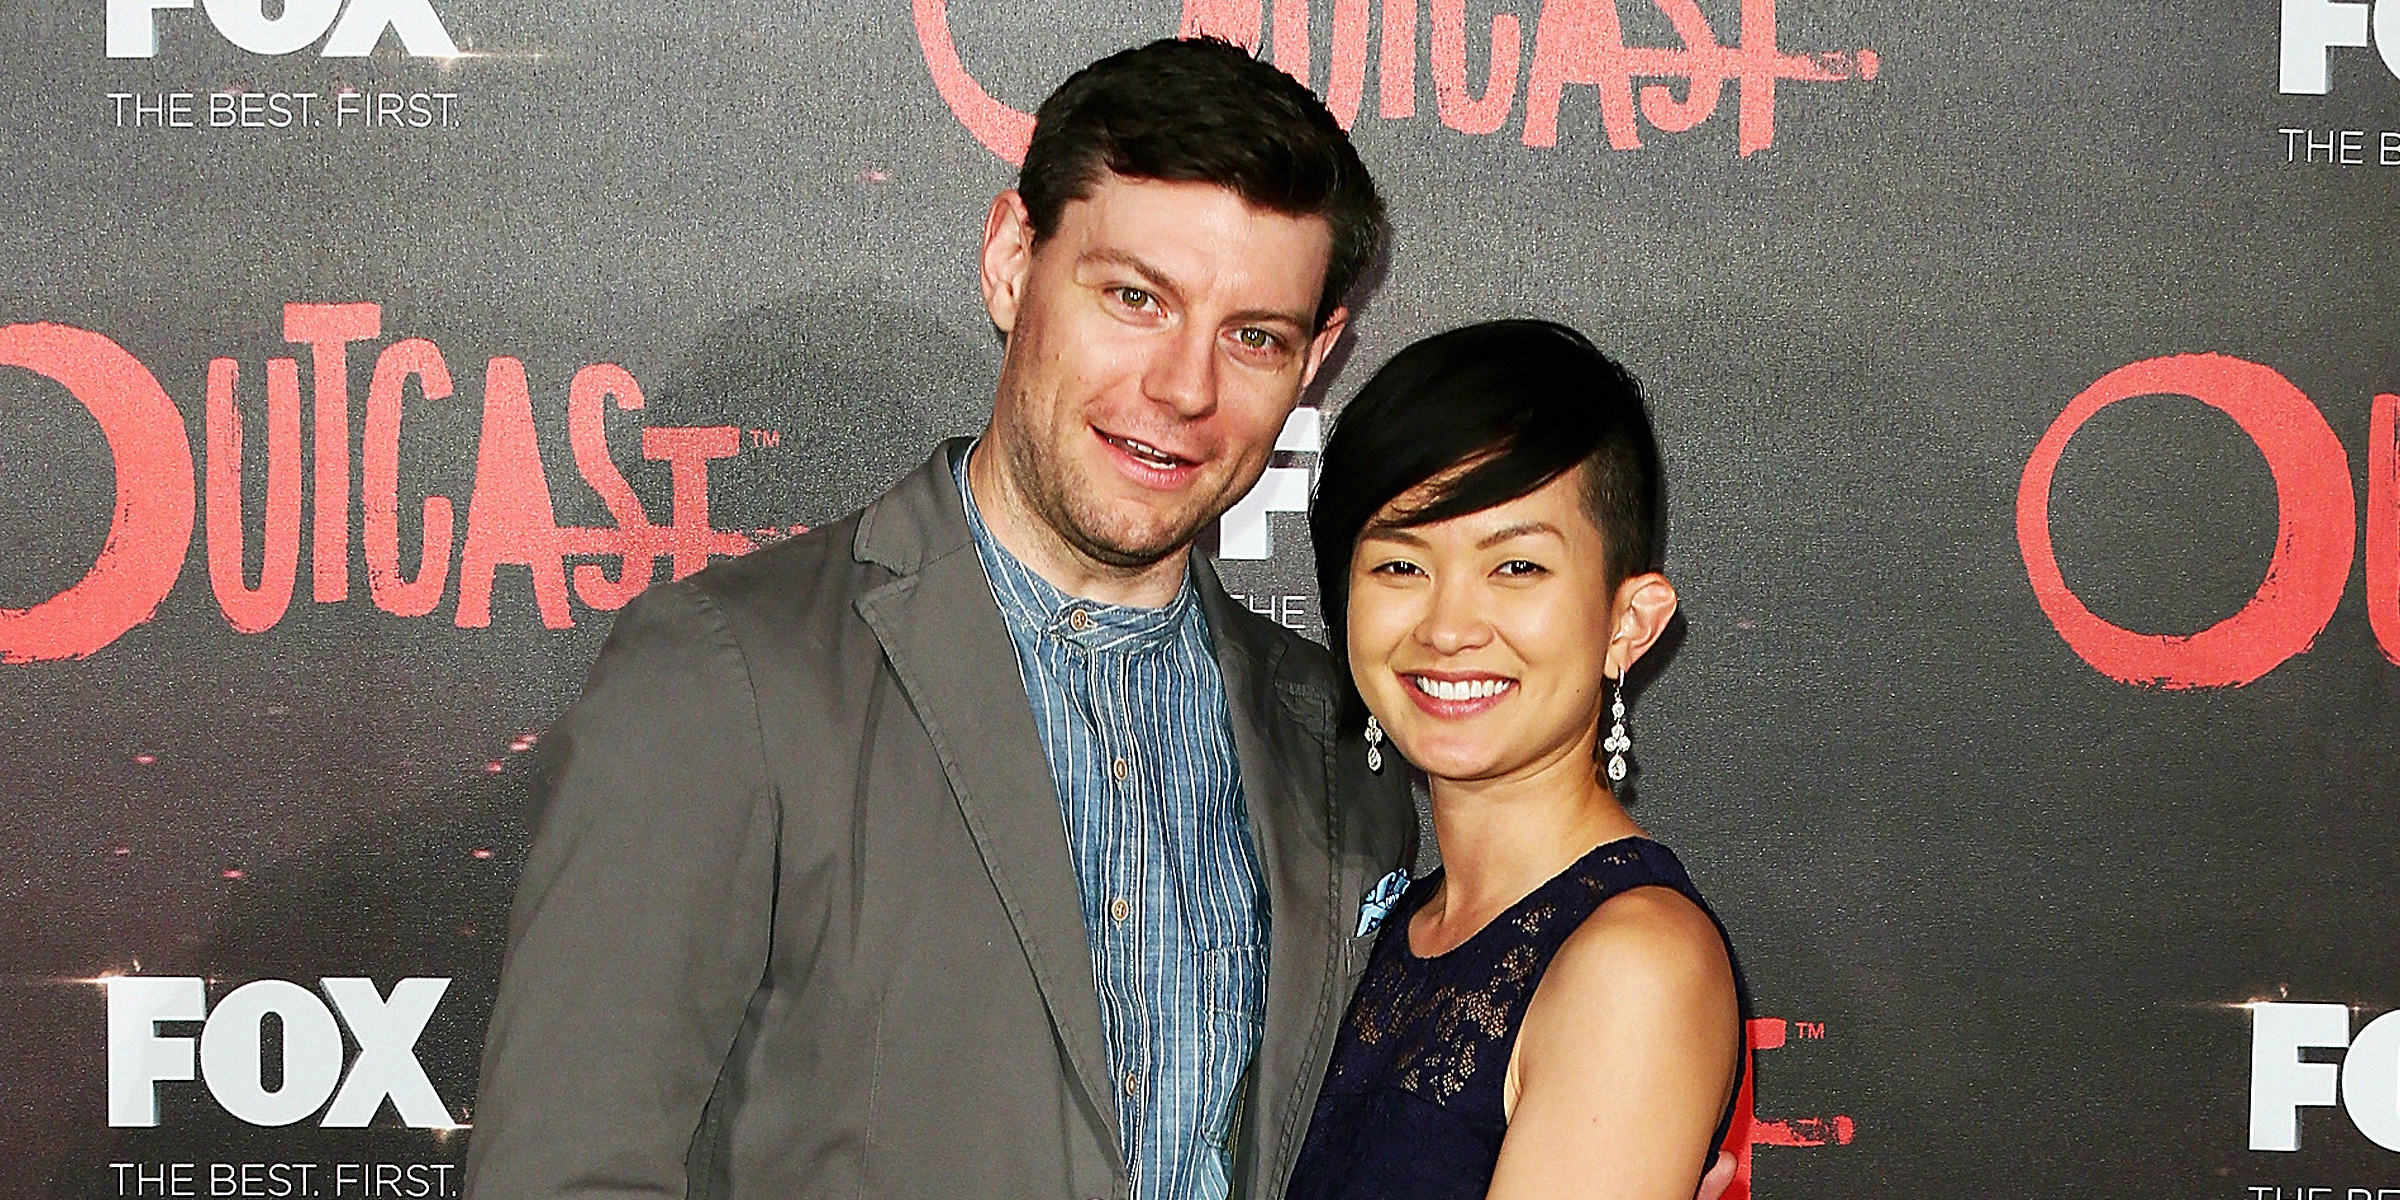 Patrick Fugit and Jenny Del Rosario | Source: Getty Images